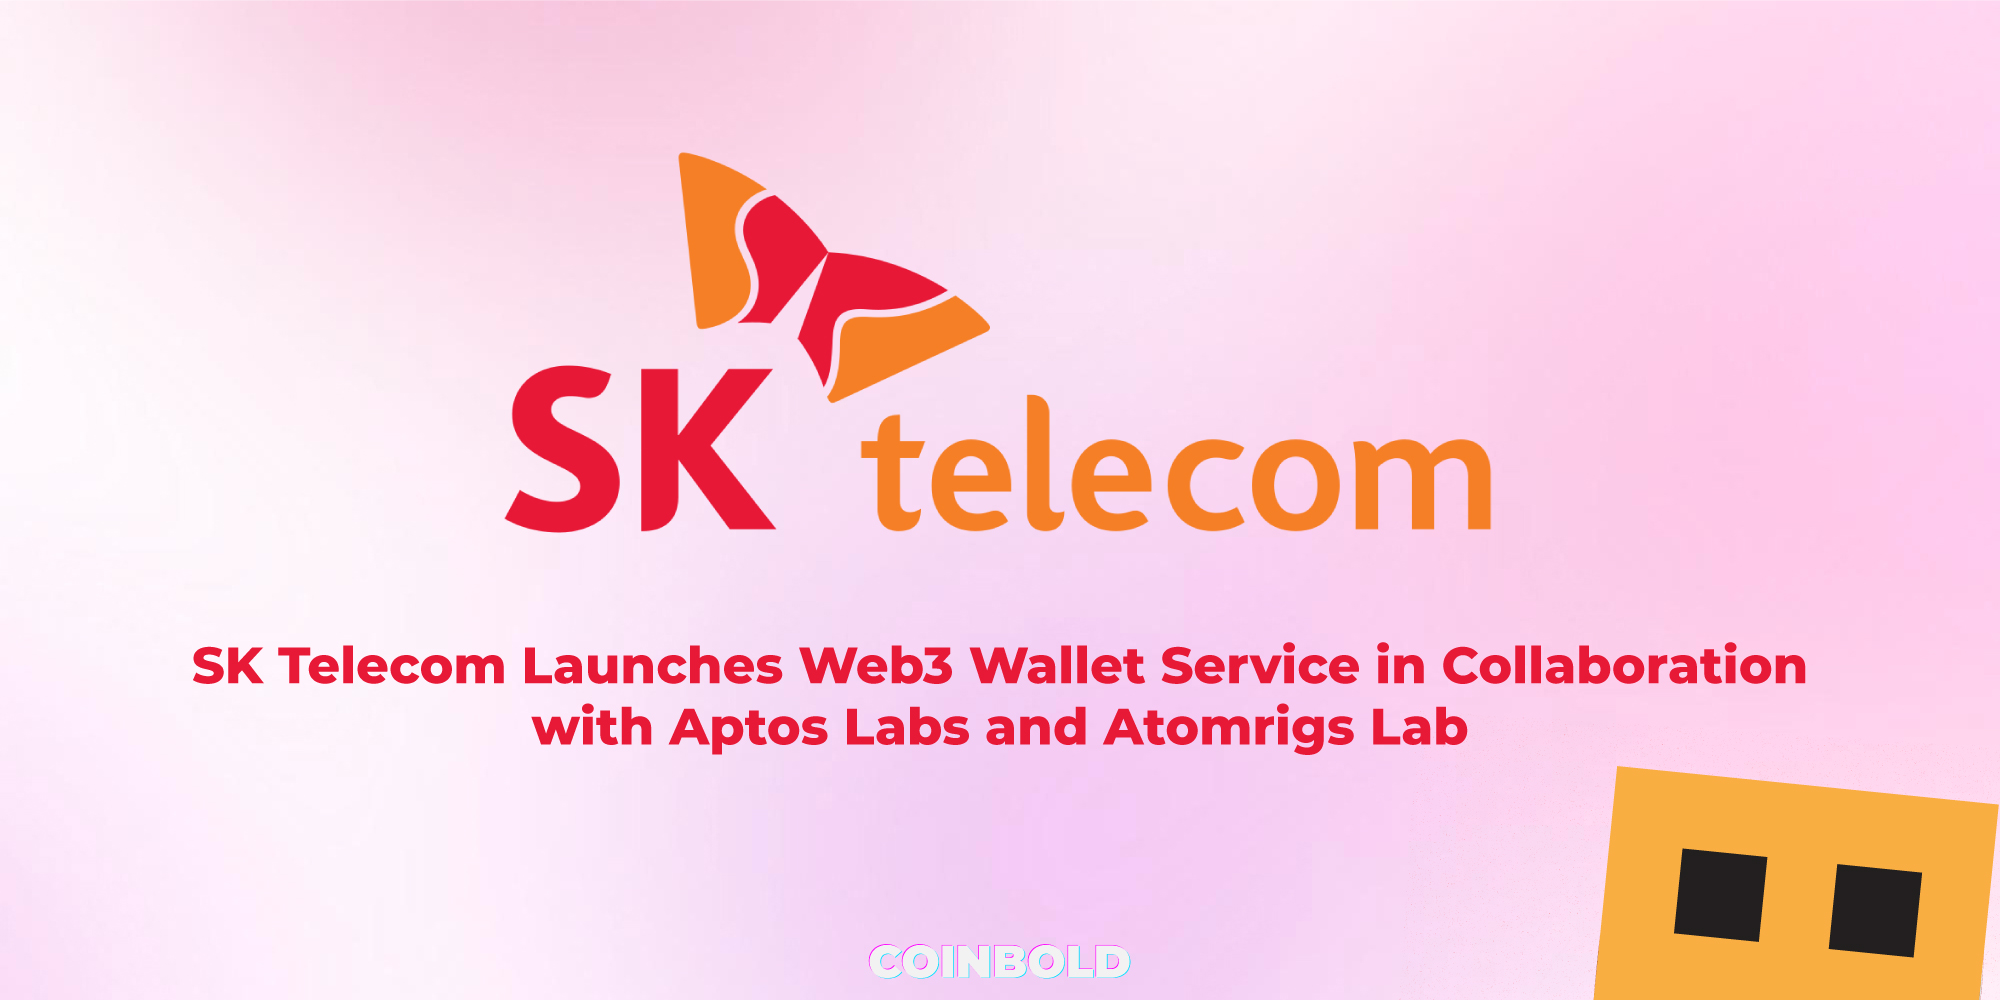 SK Telecom Launches Web3 Wallet Service in Collaboration with Aptos Labs and Atomrigs Lab